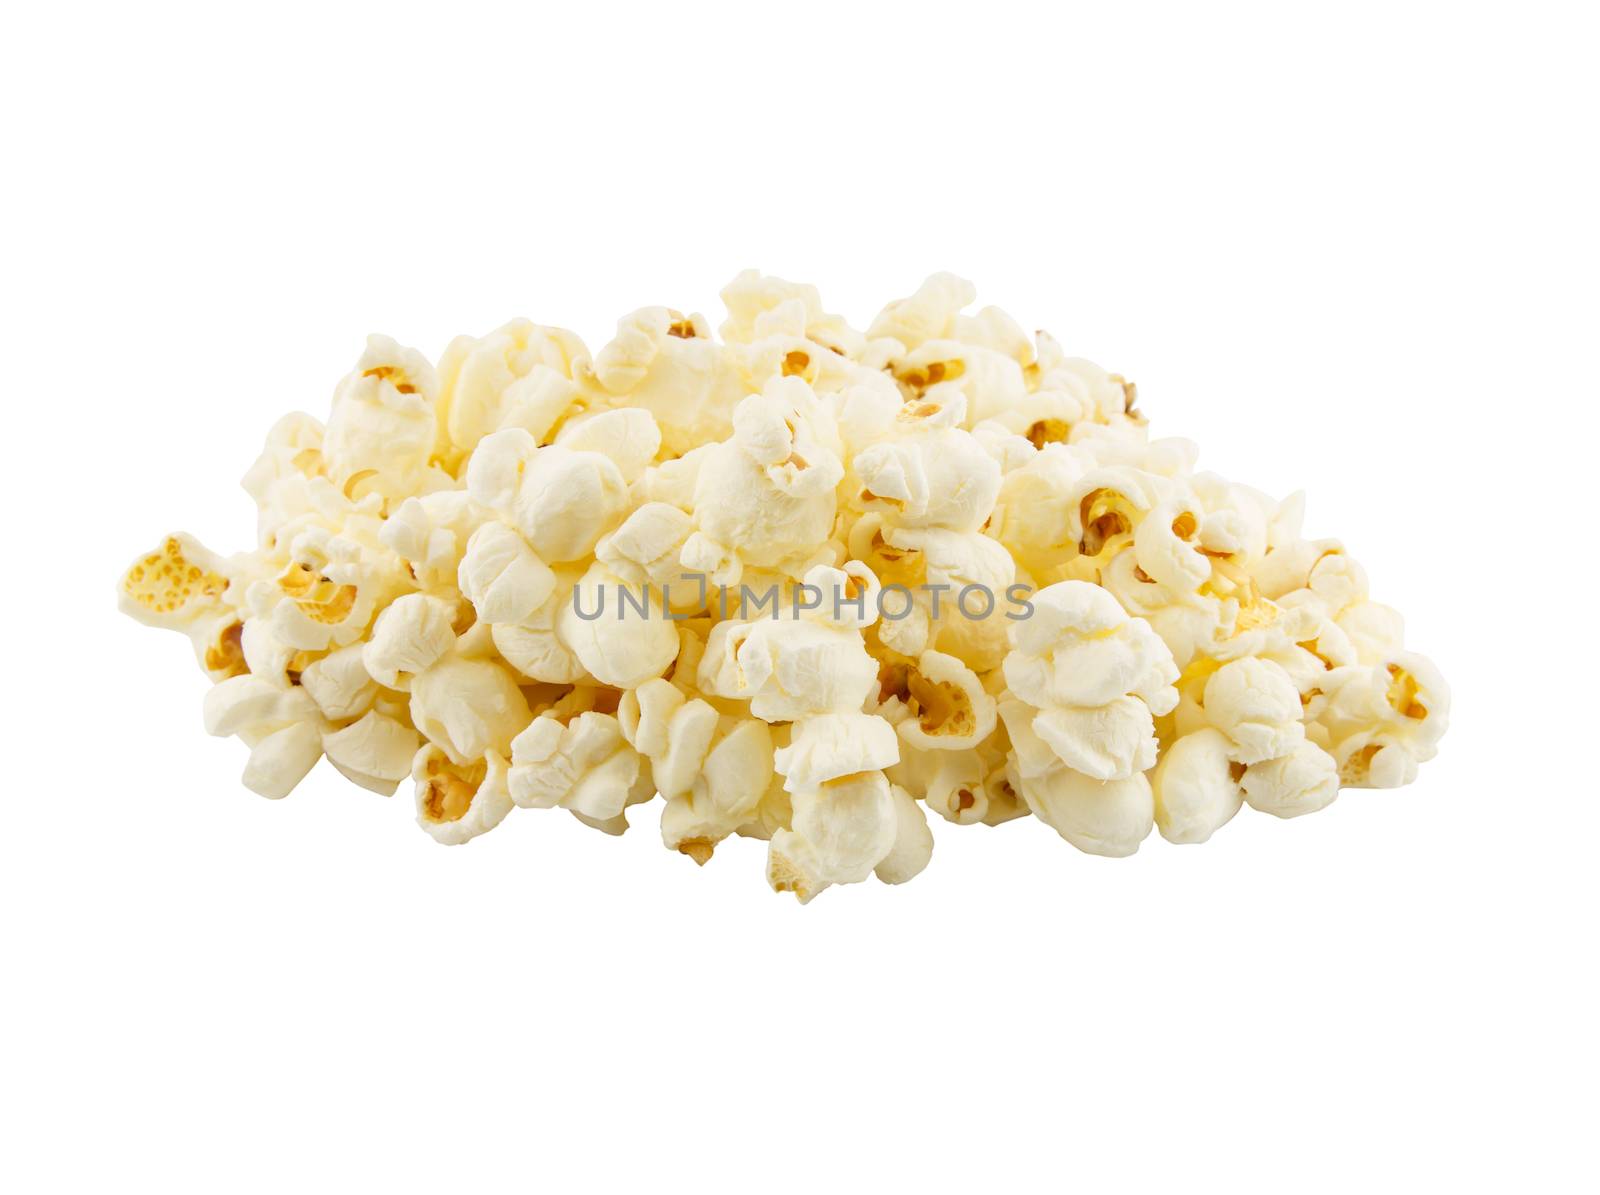 Popcorn on the white background by vitawin